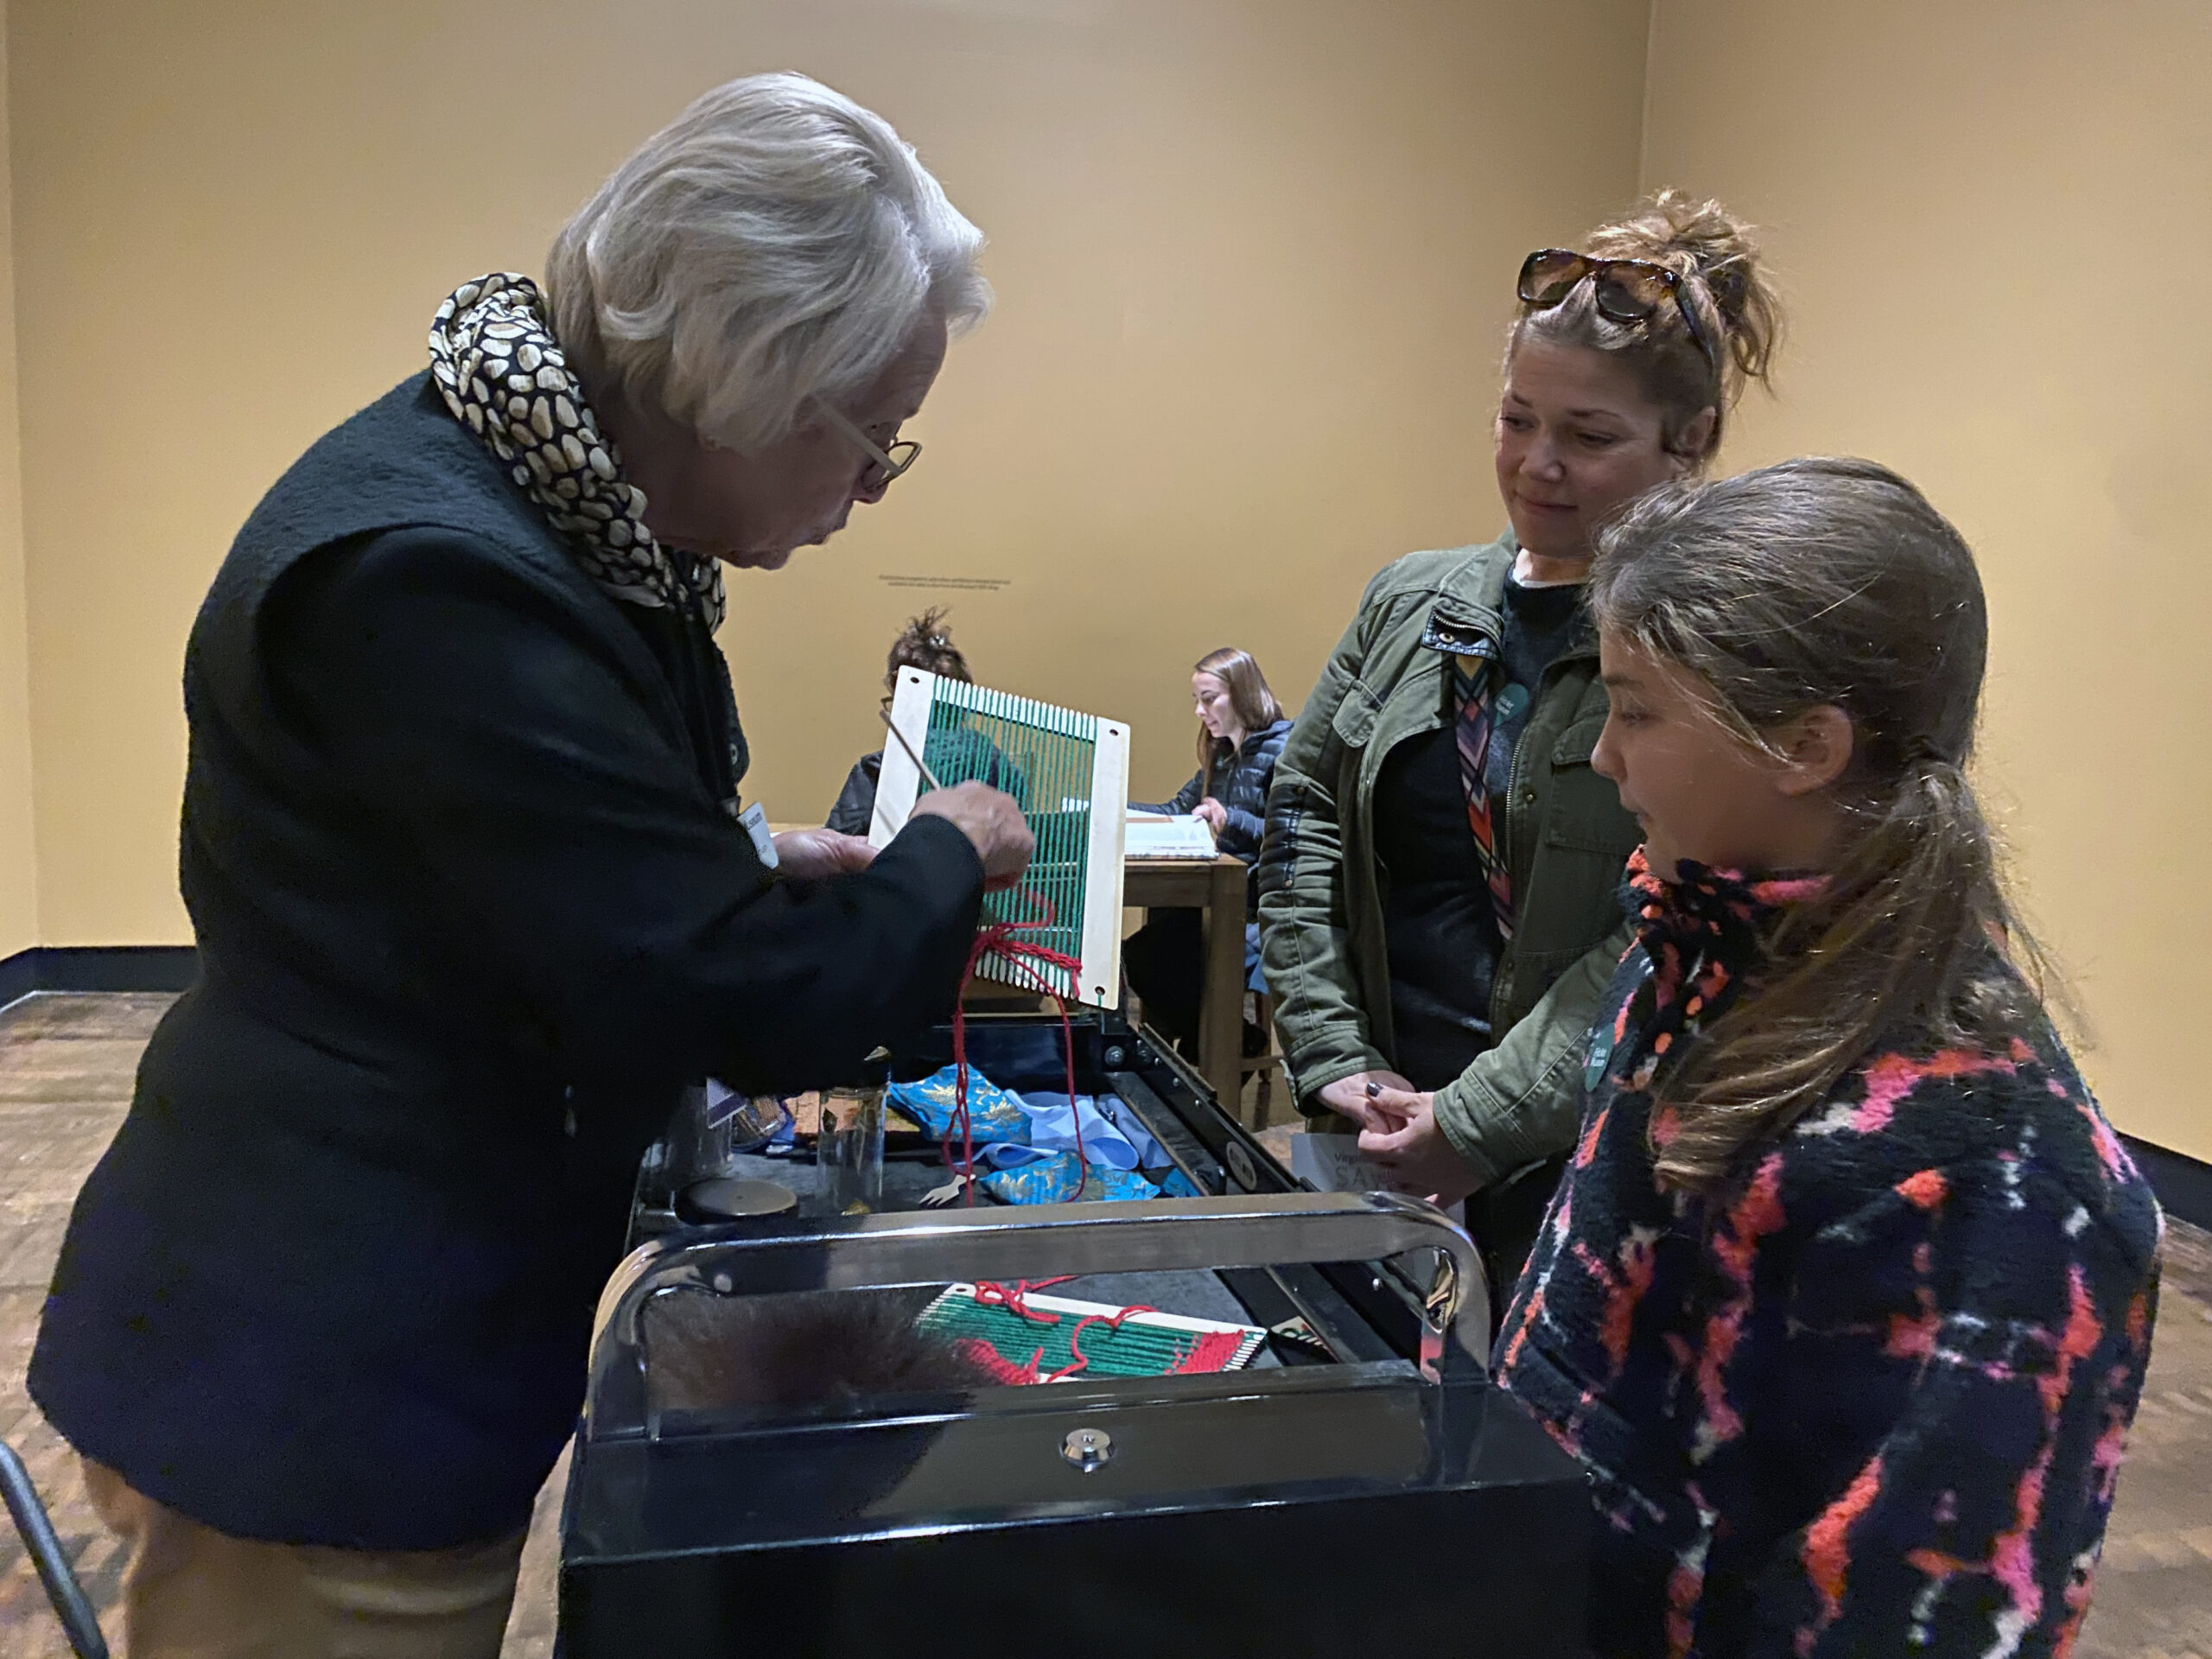 Volunteer showing a mother and daughter a weaving activity in the gallery